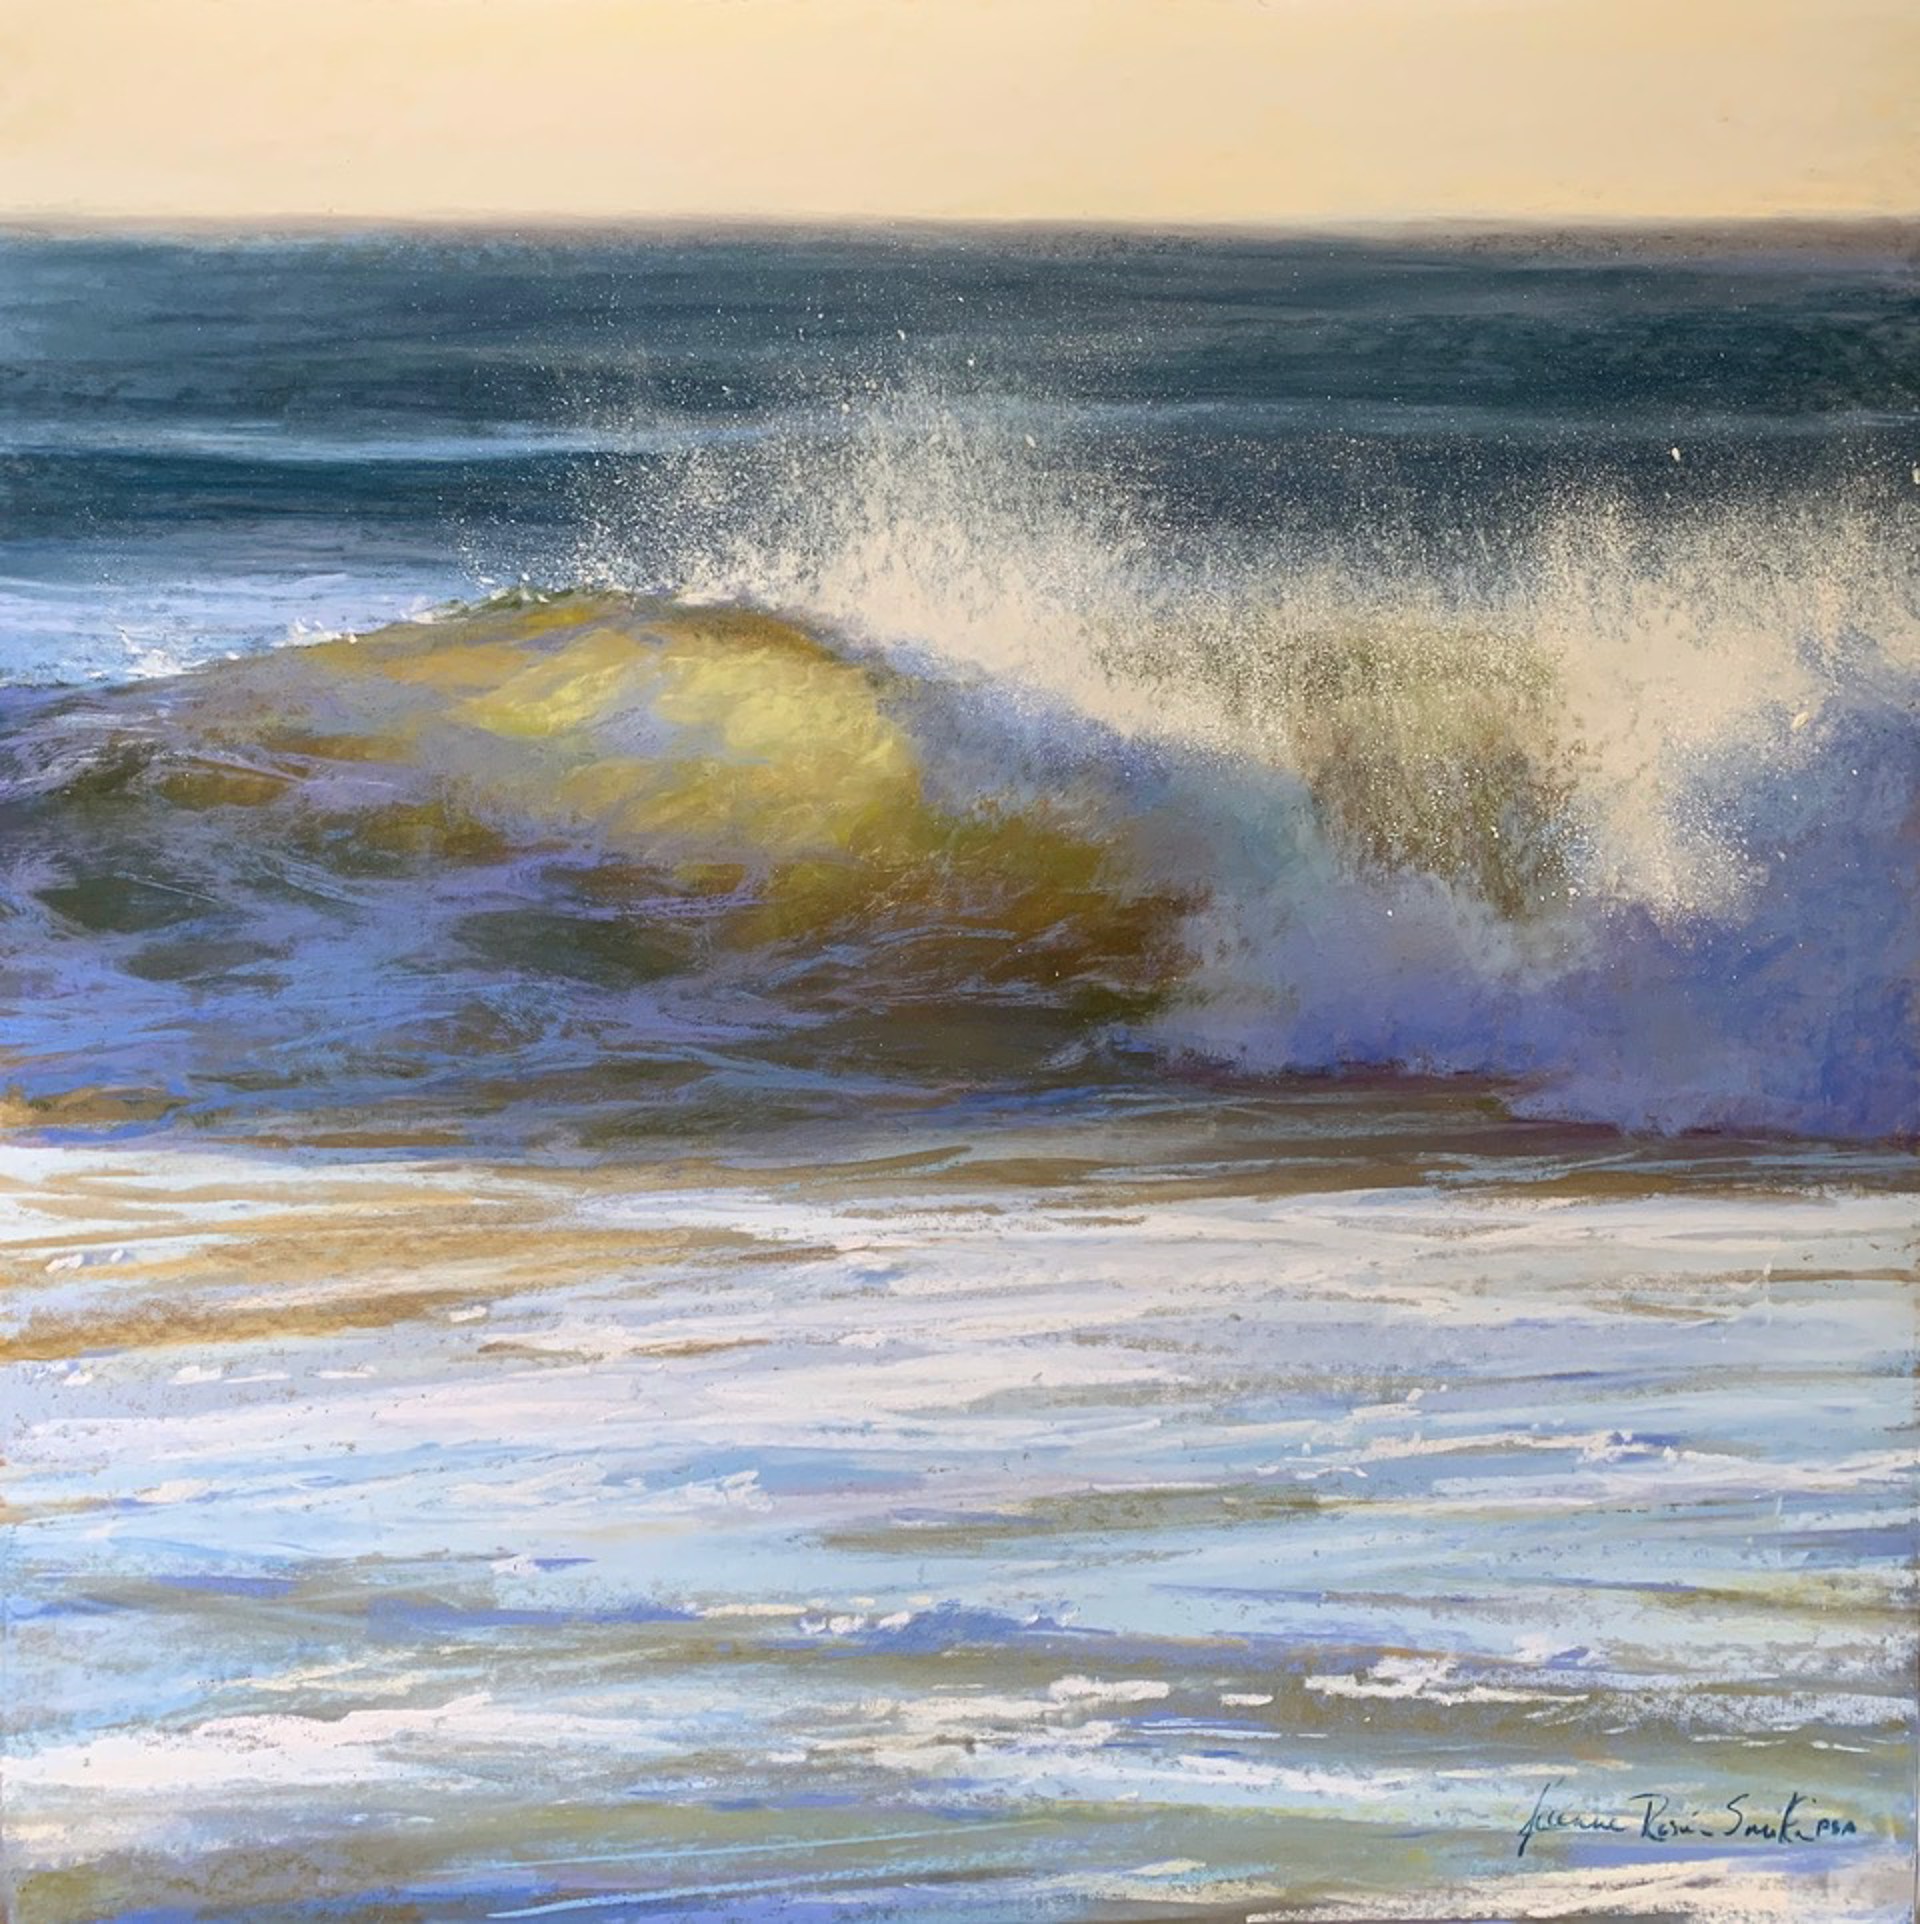 Early Morning Light by Jeanne Rosier Smith